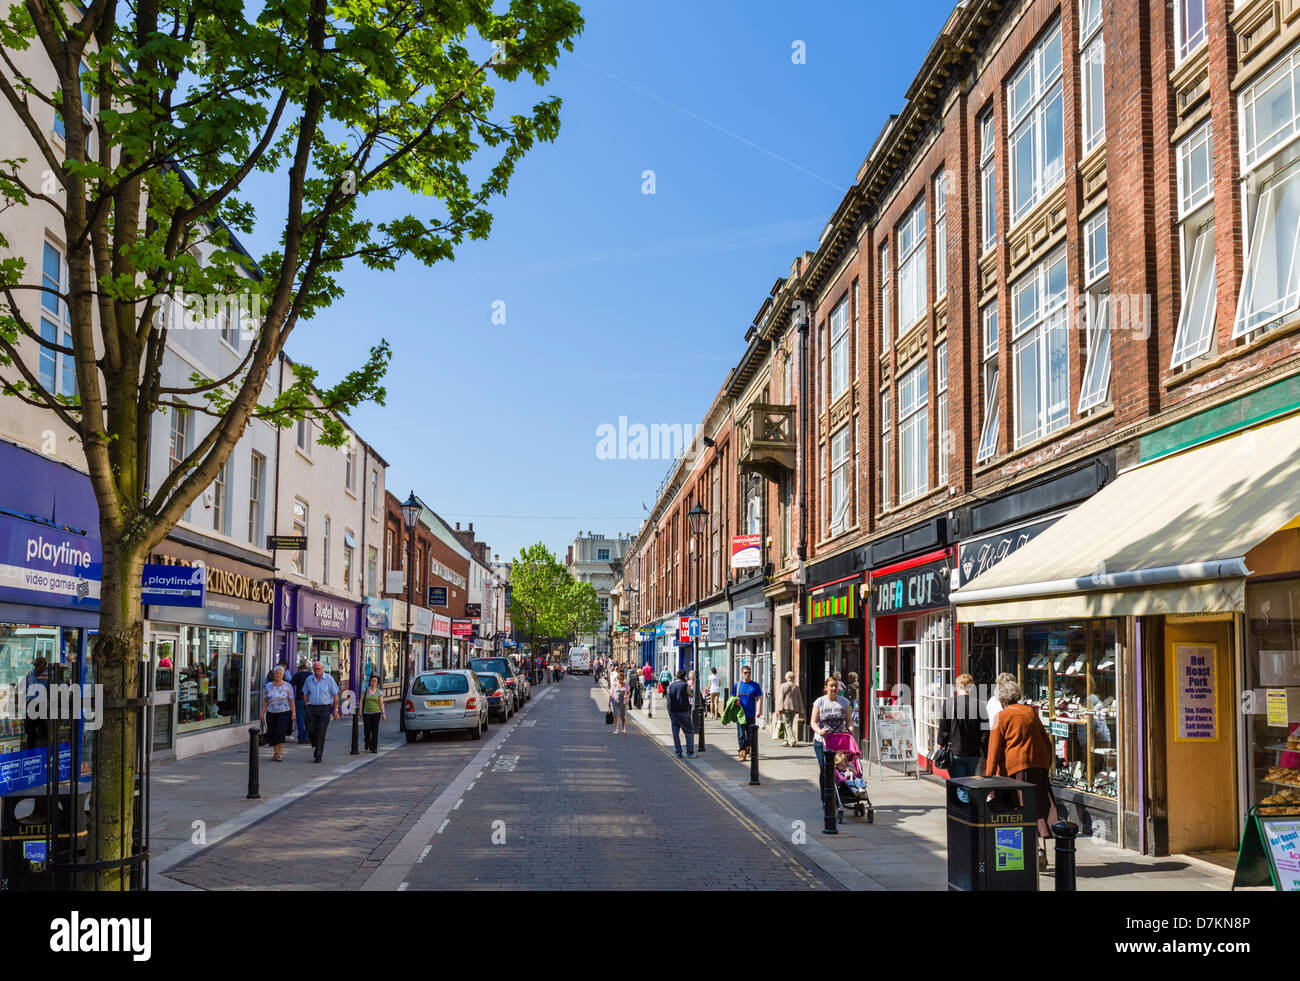 Shops on Scot Lane in the town centre, Doncaster, South Yorkshire, England, UK Stock Photo